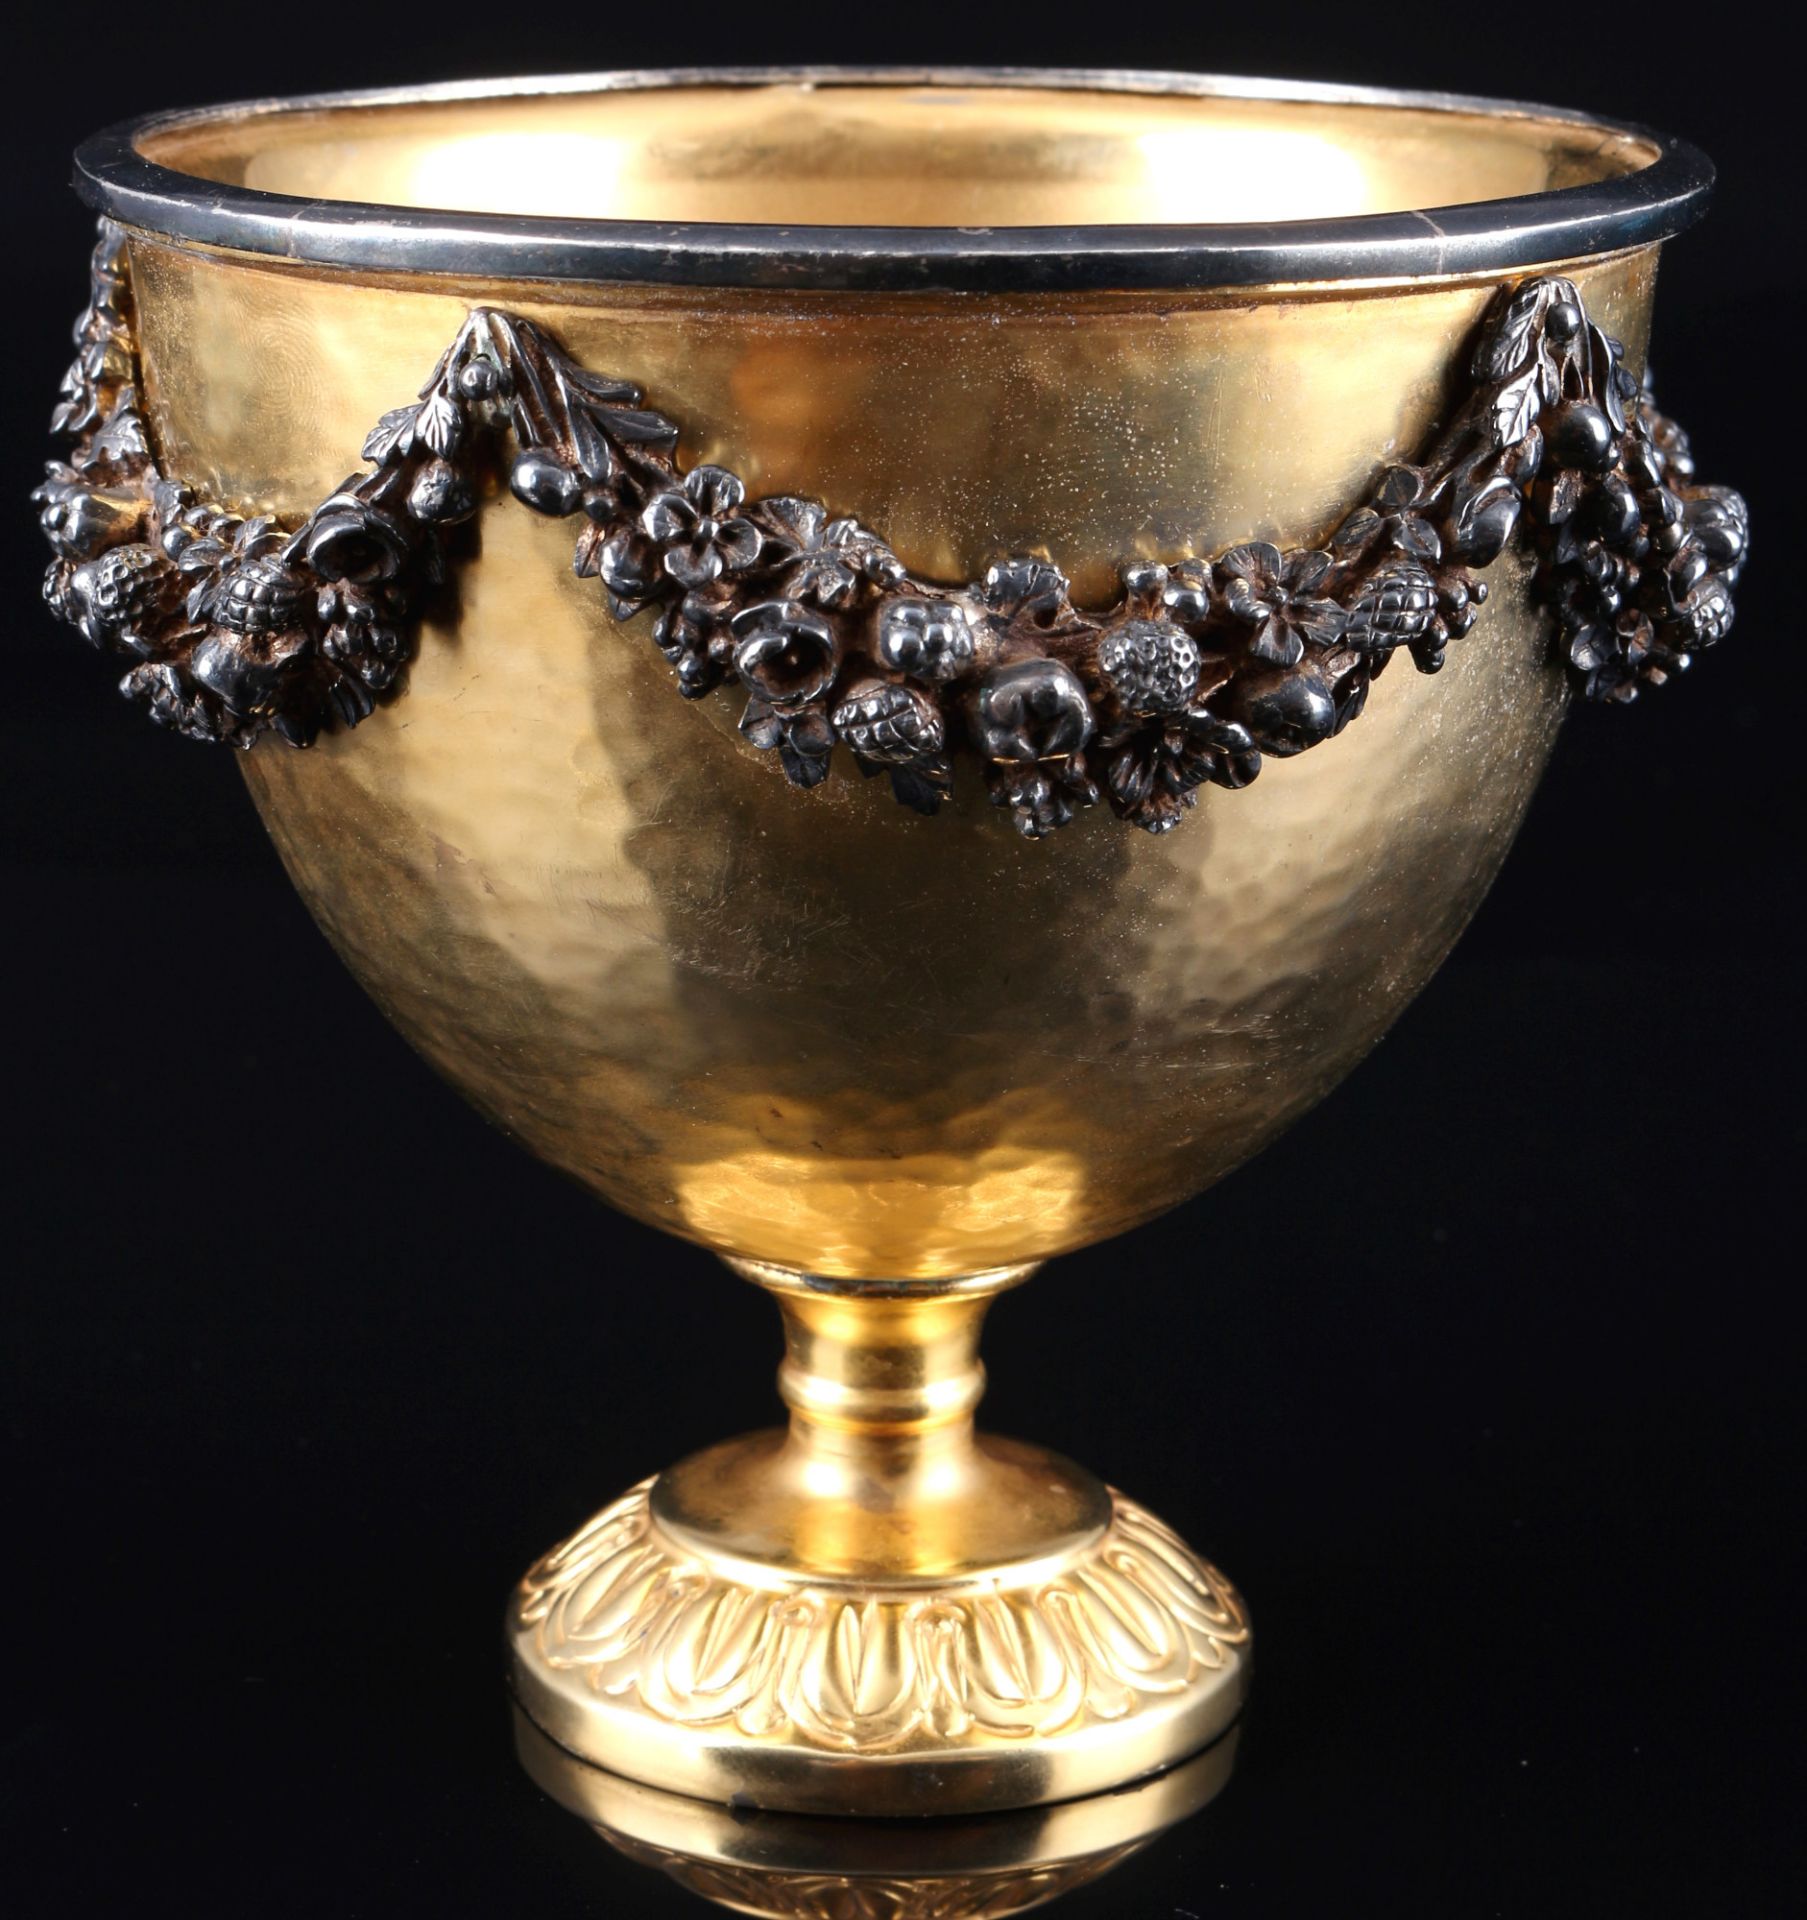 Ilias Lalaounis bronze goblet with 925 silver rim, Ilias Lalaounis Bronze Kelch mit 925 Silberrand, - Image 3 of 5